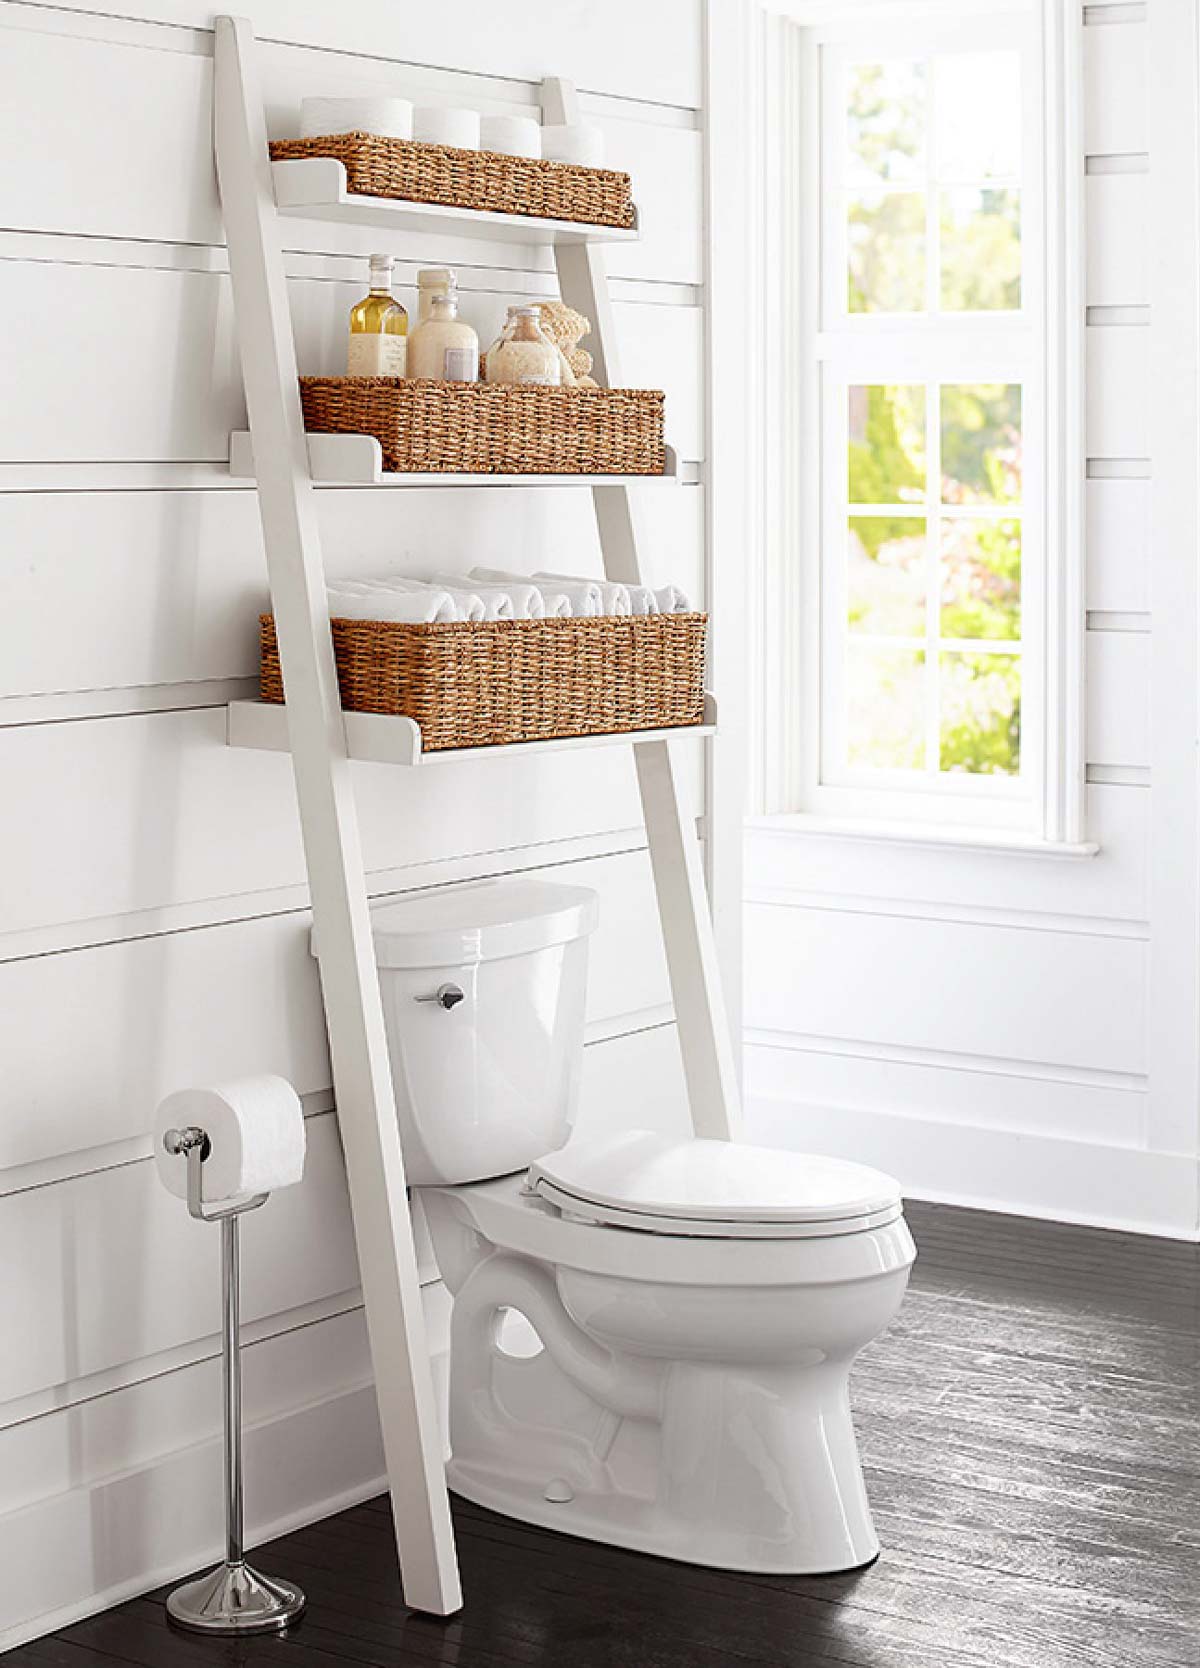 Over the toilet decorative ladder with baskets